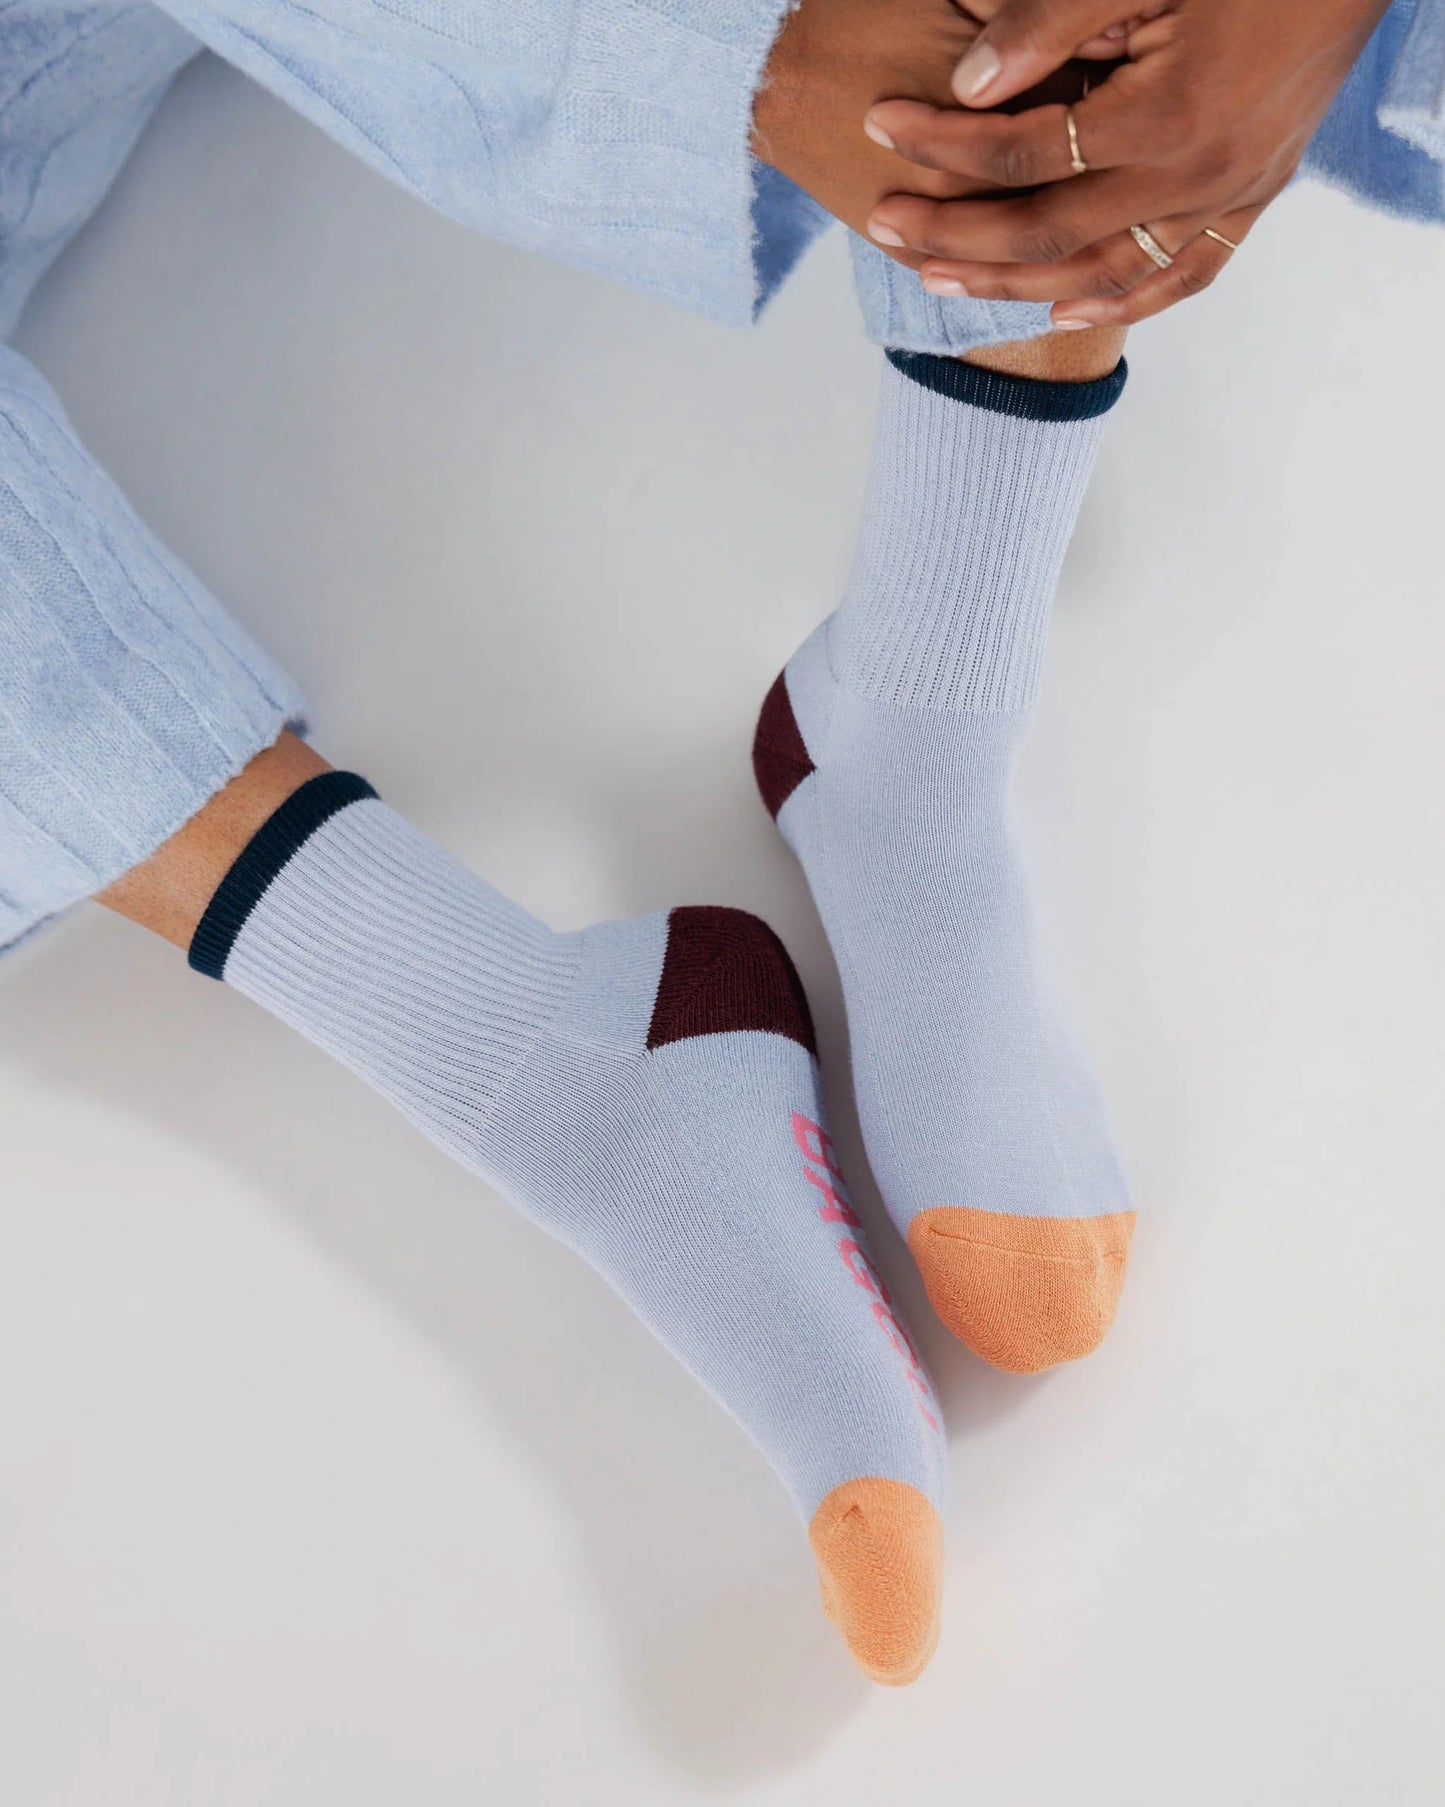 Light Blue Socks with black Ankle Stripe, Brown heel, orange colour blocked toes, and pink "BAGGU" text on bottom of feet